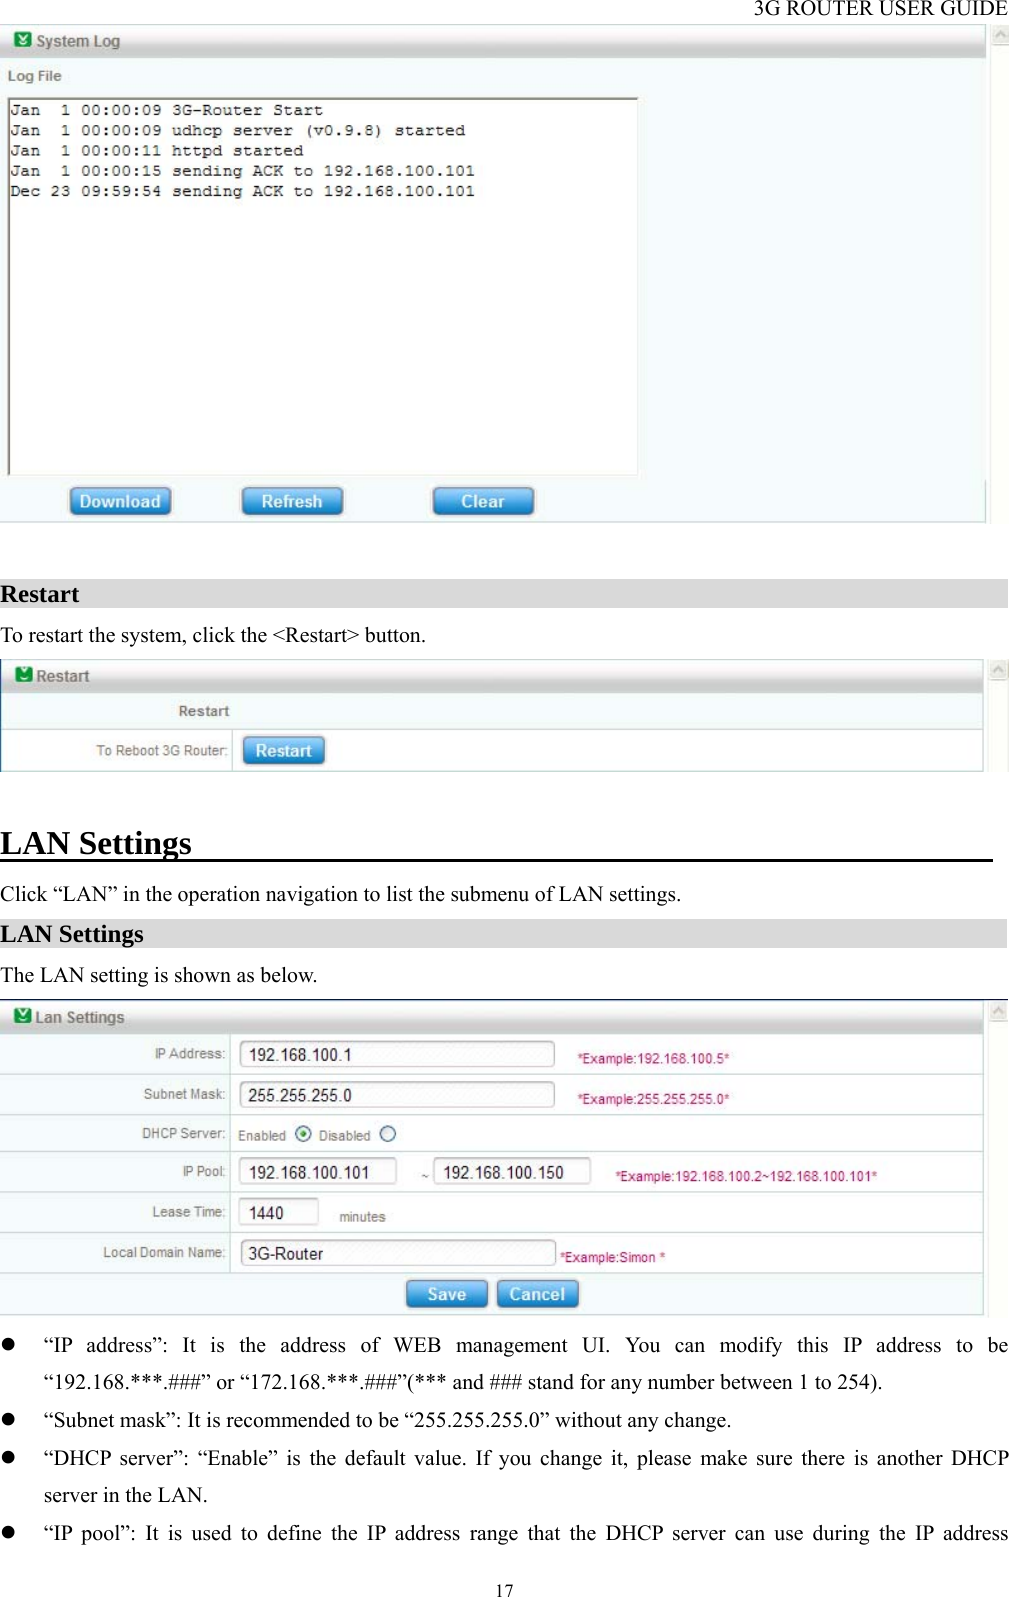 3G ROUTER USER GUIDE  17  Restart                                                                             To restart the system, click the &lt;Restart&gt; button.   LAN Settings                                                 Click “LAN” in the operation navigation to list the submenu of LAN settings. LAN Settings                                                                      The LAN setting is shown as below.  z “IP address”: It is the address of WEB management UI. You can modify this IP address to be “192.168.***.###” or “172.168.***.###”(*** and ### stand for any number between 1 to 254).   z “Subnet mask”: It is recommended to be “255.255.255.0” without any change. z “DHCP server”: “Enable” is the default value. If you change it, please make sure there is another DHCP server in the LAN. z “IP pool”: It is used to define the IP address range that the DHCP server can use during the IP address 